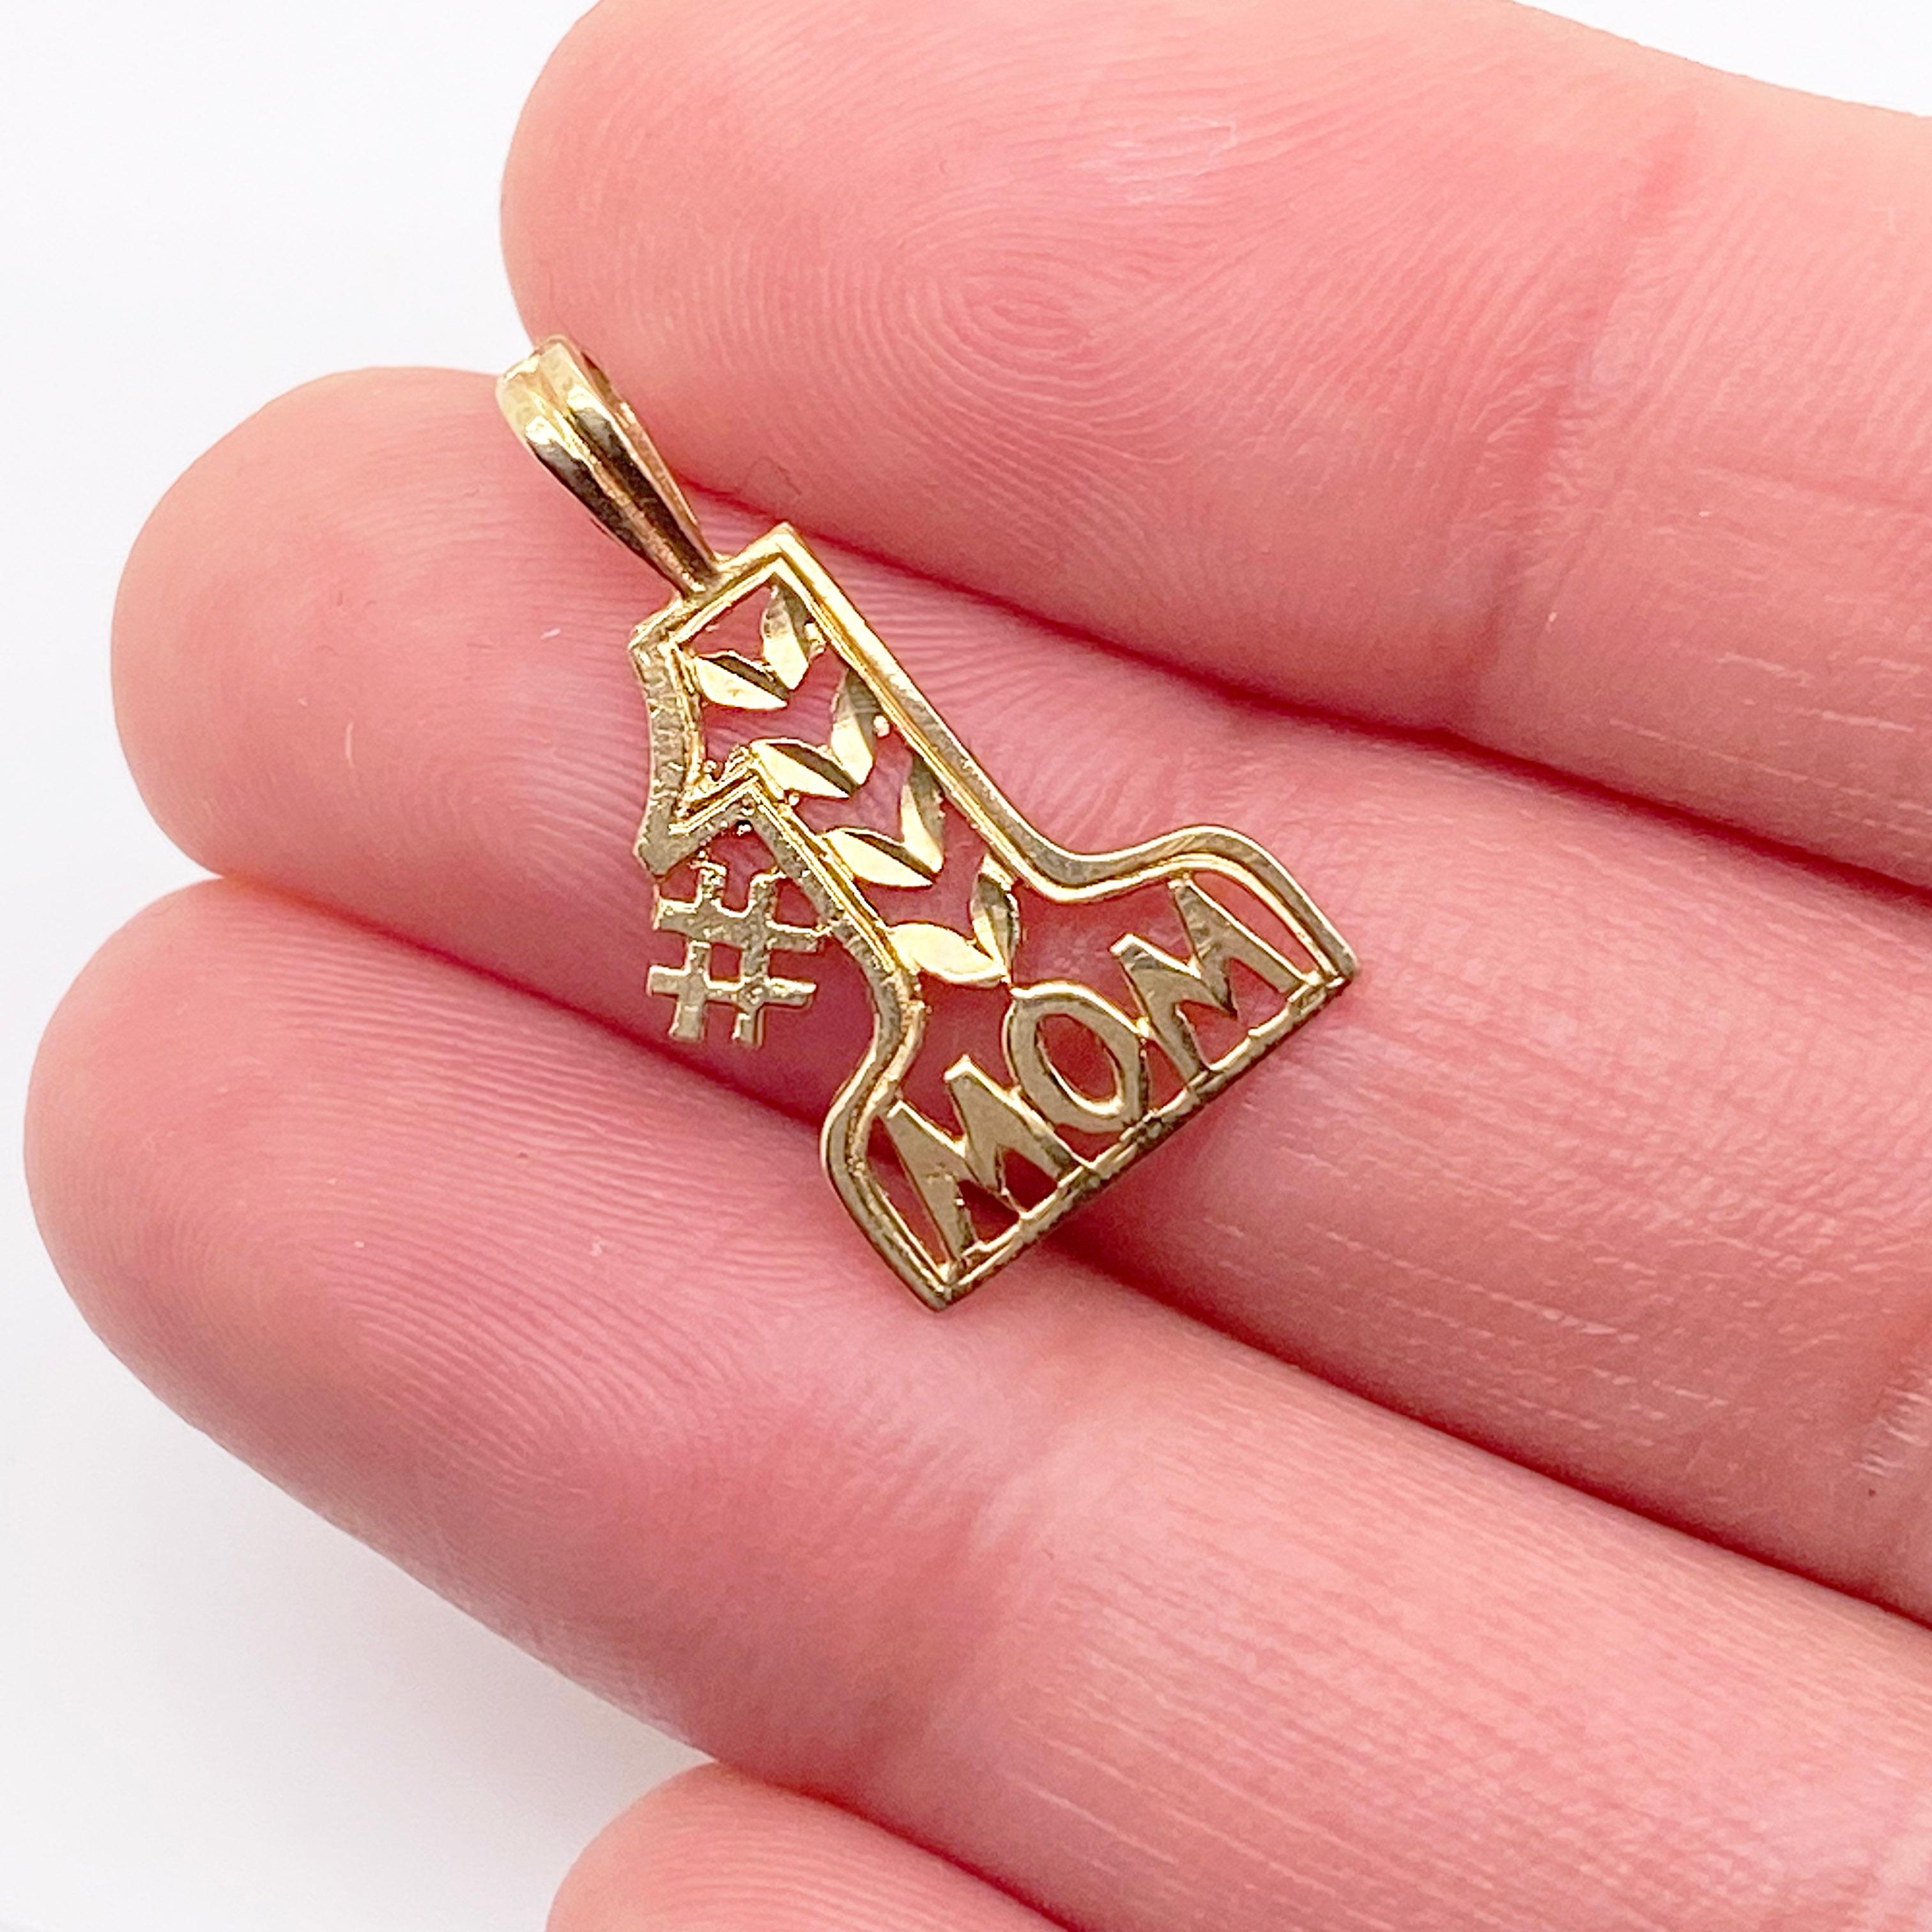 Mom is the Best and deserves to be #1! This 14 karat yellow gold charm is a very sweet, sentimental gift. This can be used on a charm bracelet or as a pendant on a necklace. Either way, let your mother know that she is a significant person in your